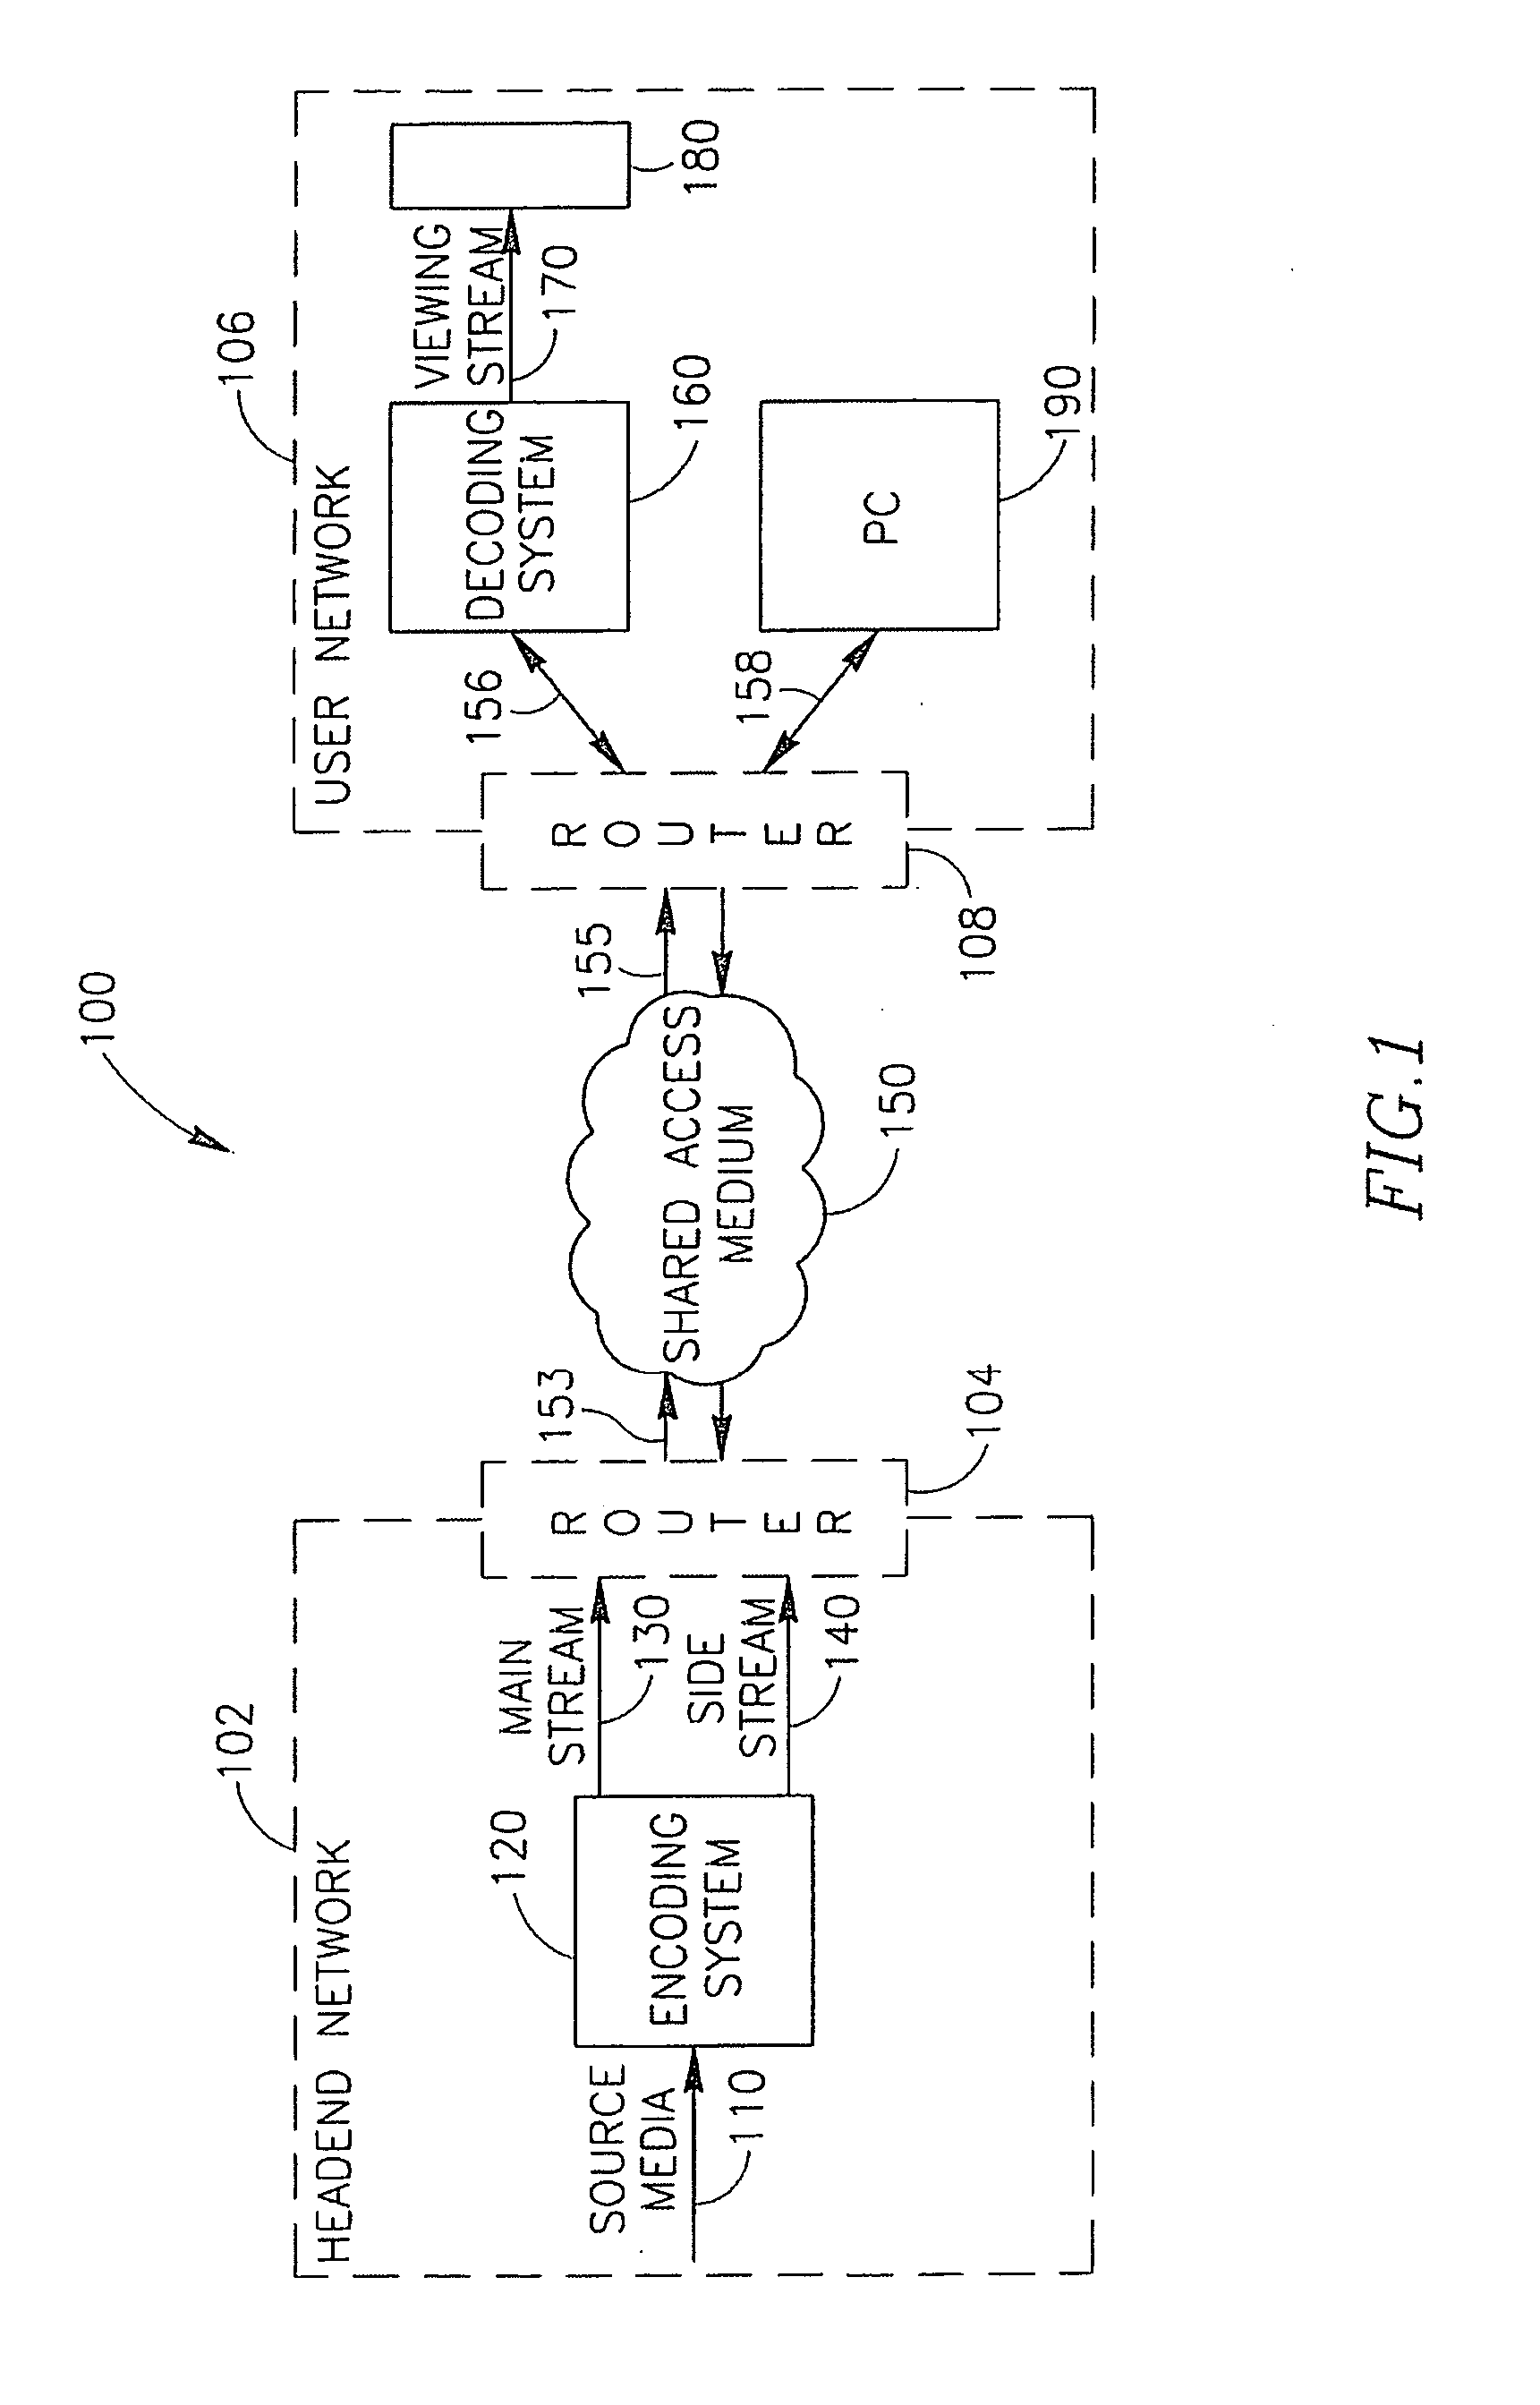 Method, apparatus, and system of fast channel hopping between encoded video streams